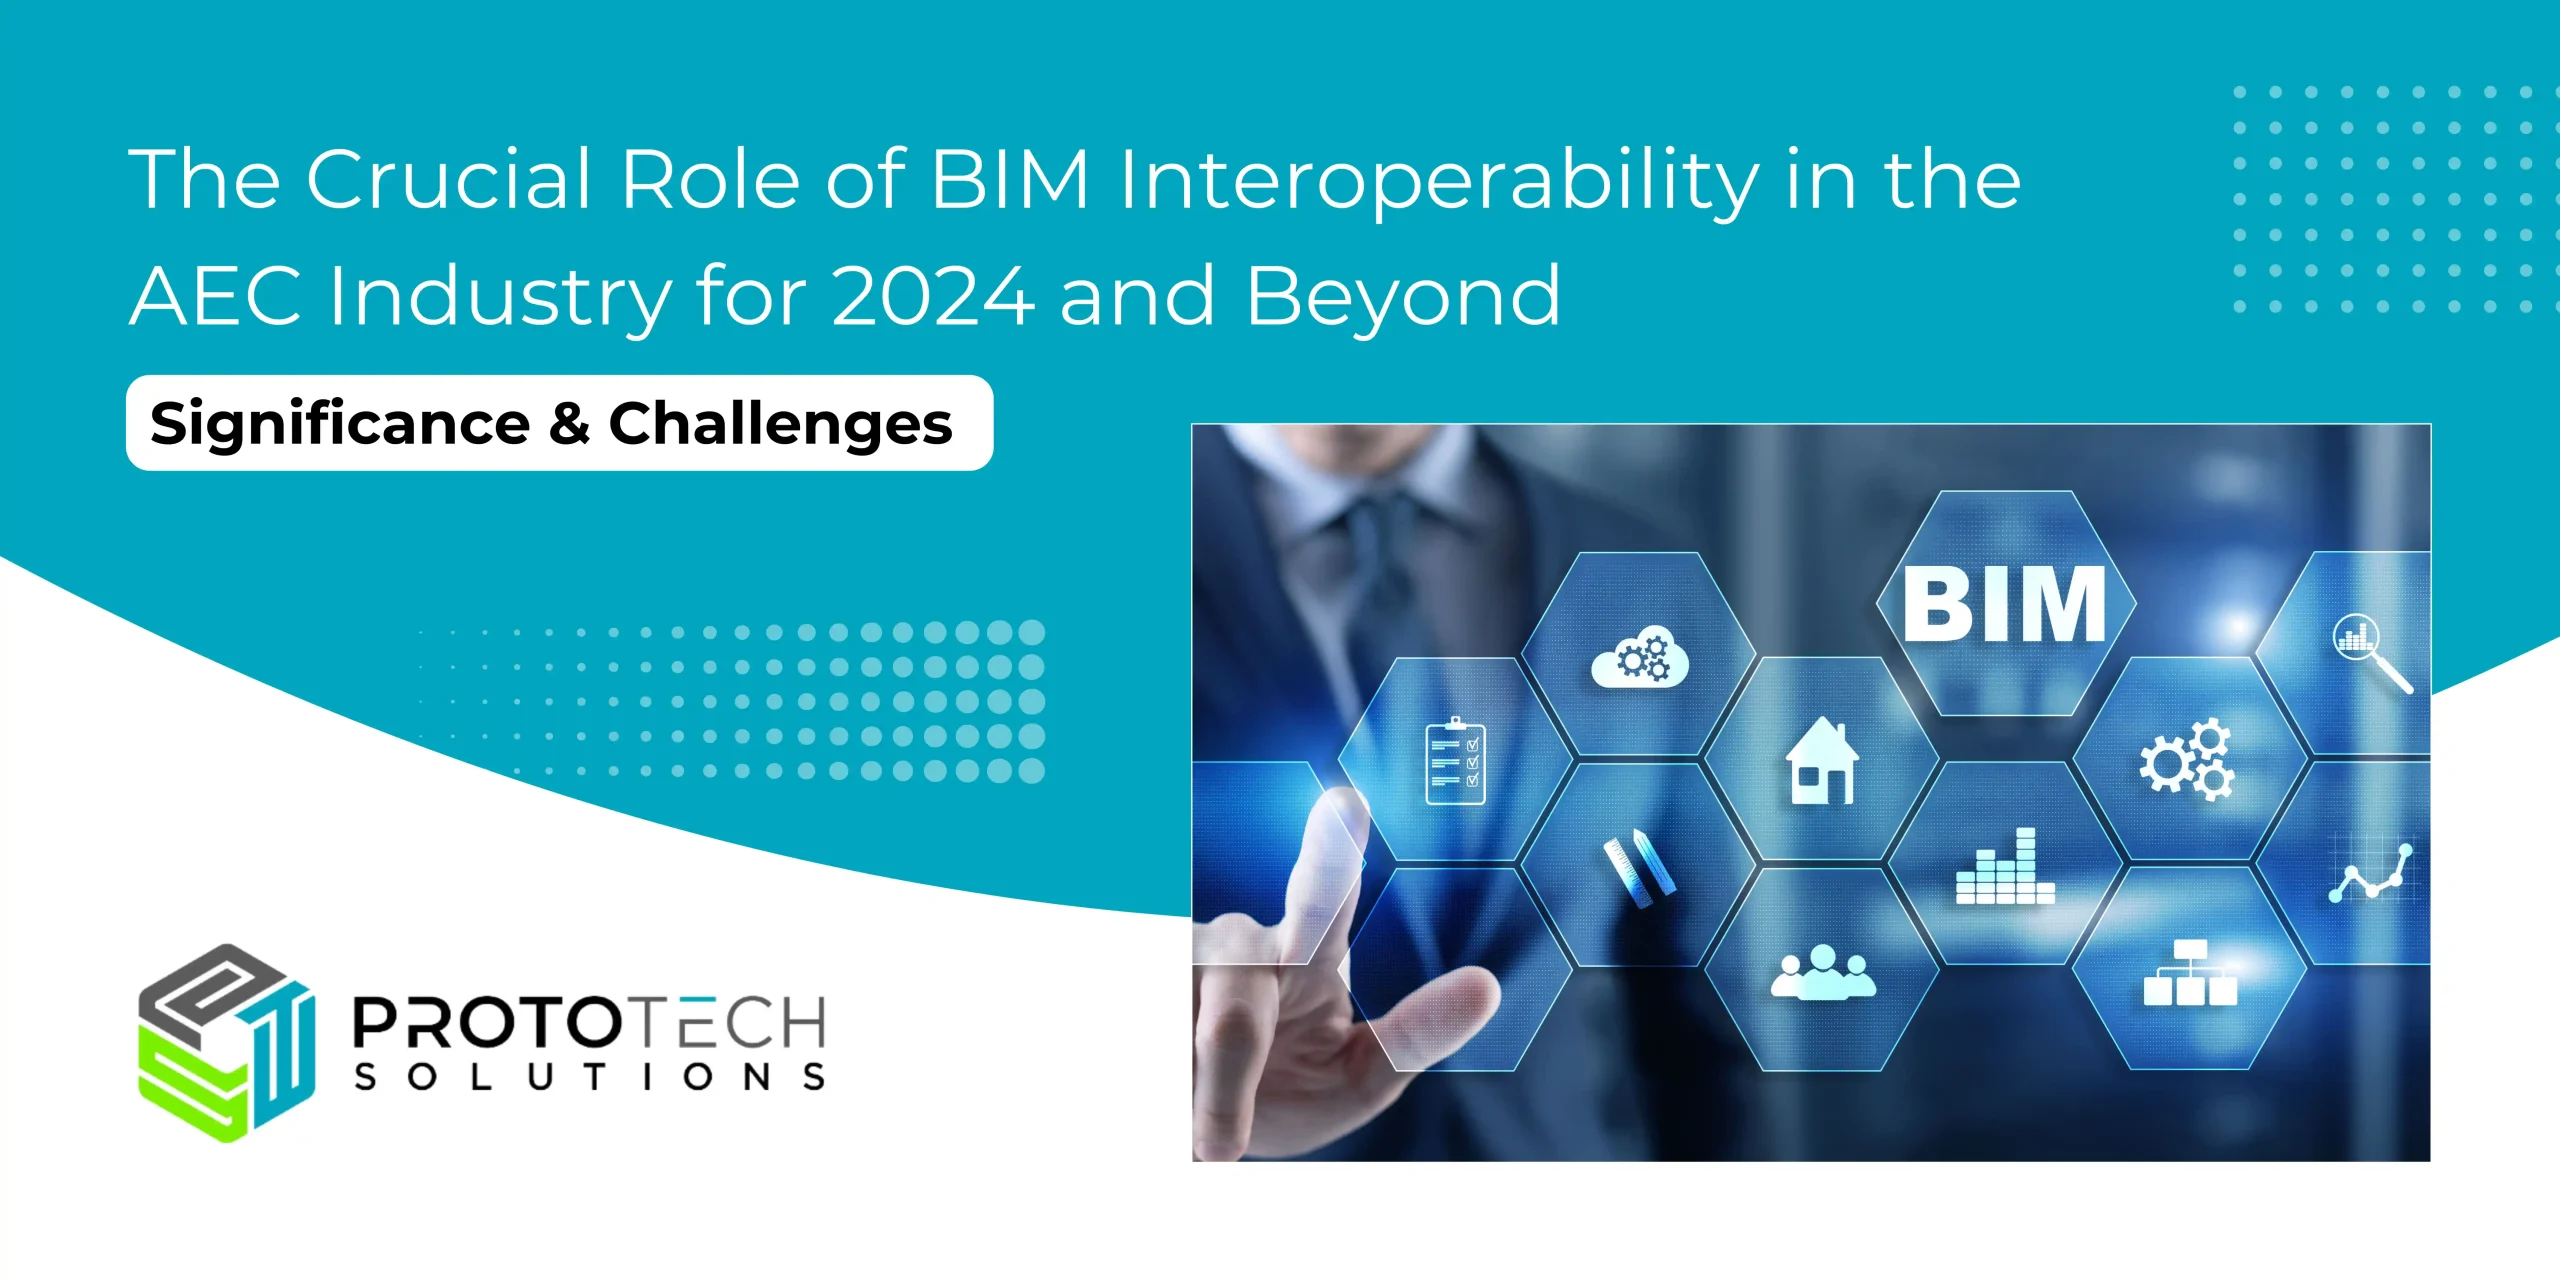 Role of BIM Interoperability in the AEC Industry for 2024